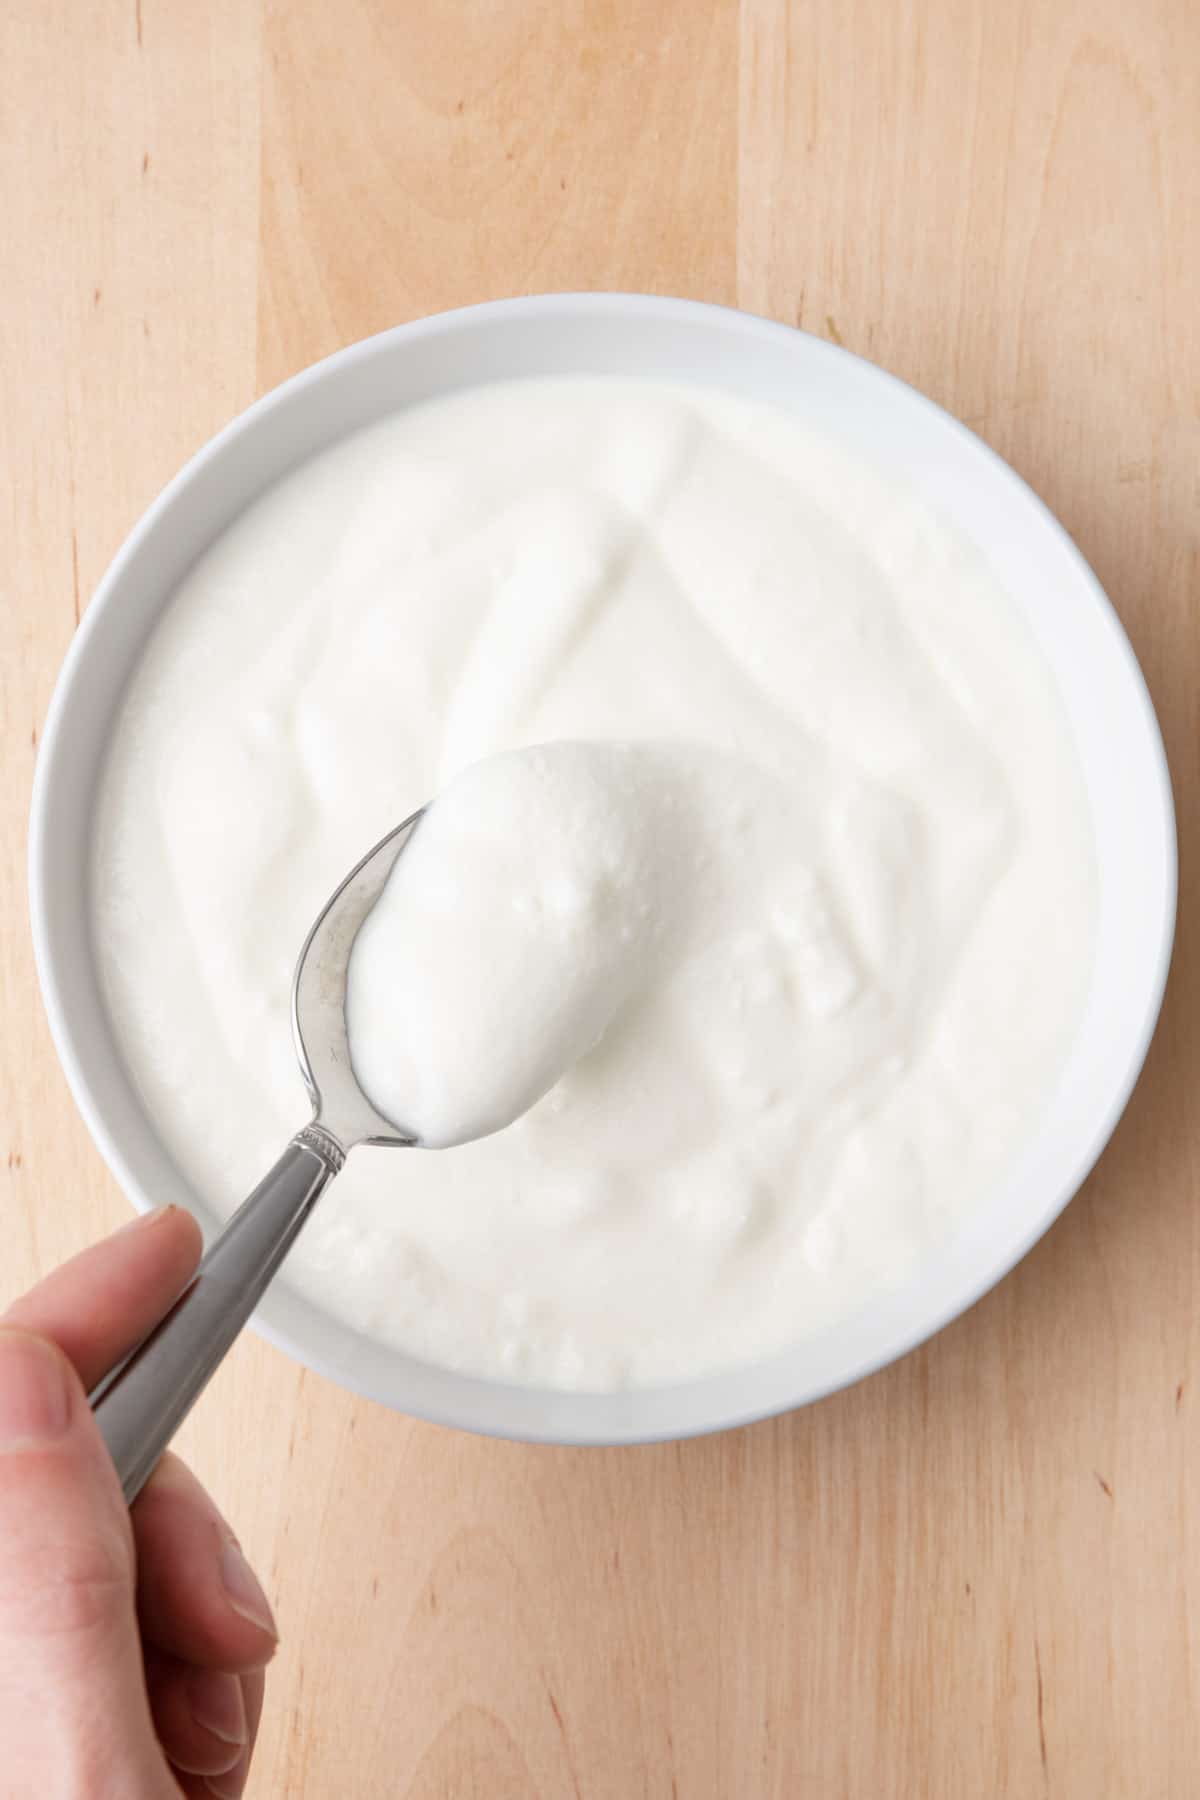 Spoon lifting up a scoop of yogurt from a white bowl on a cutting board.